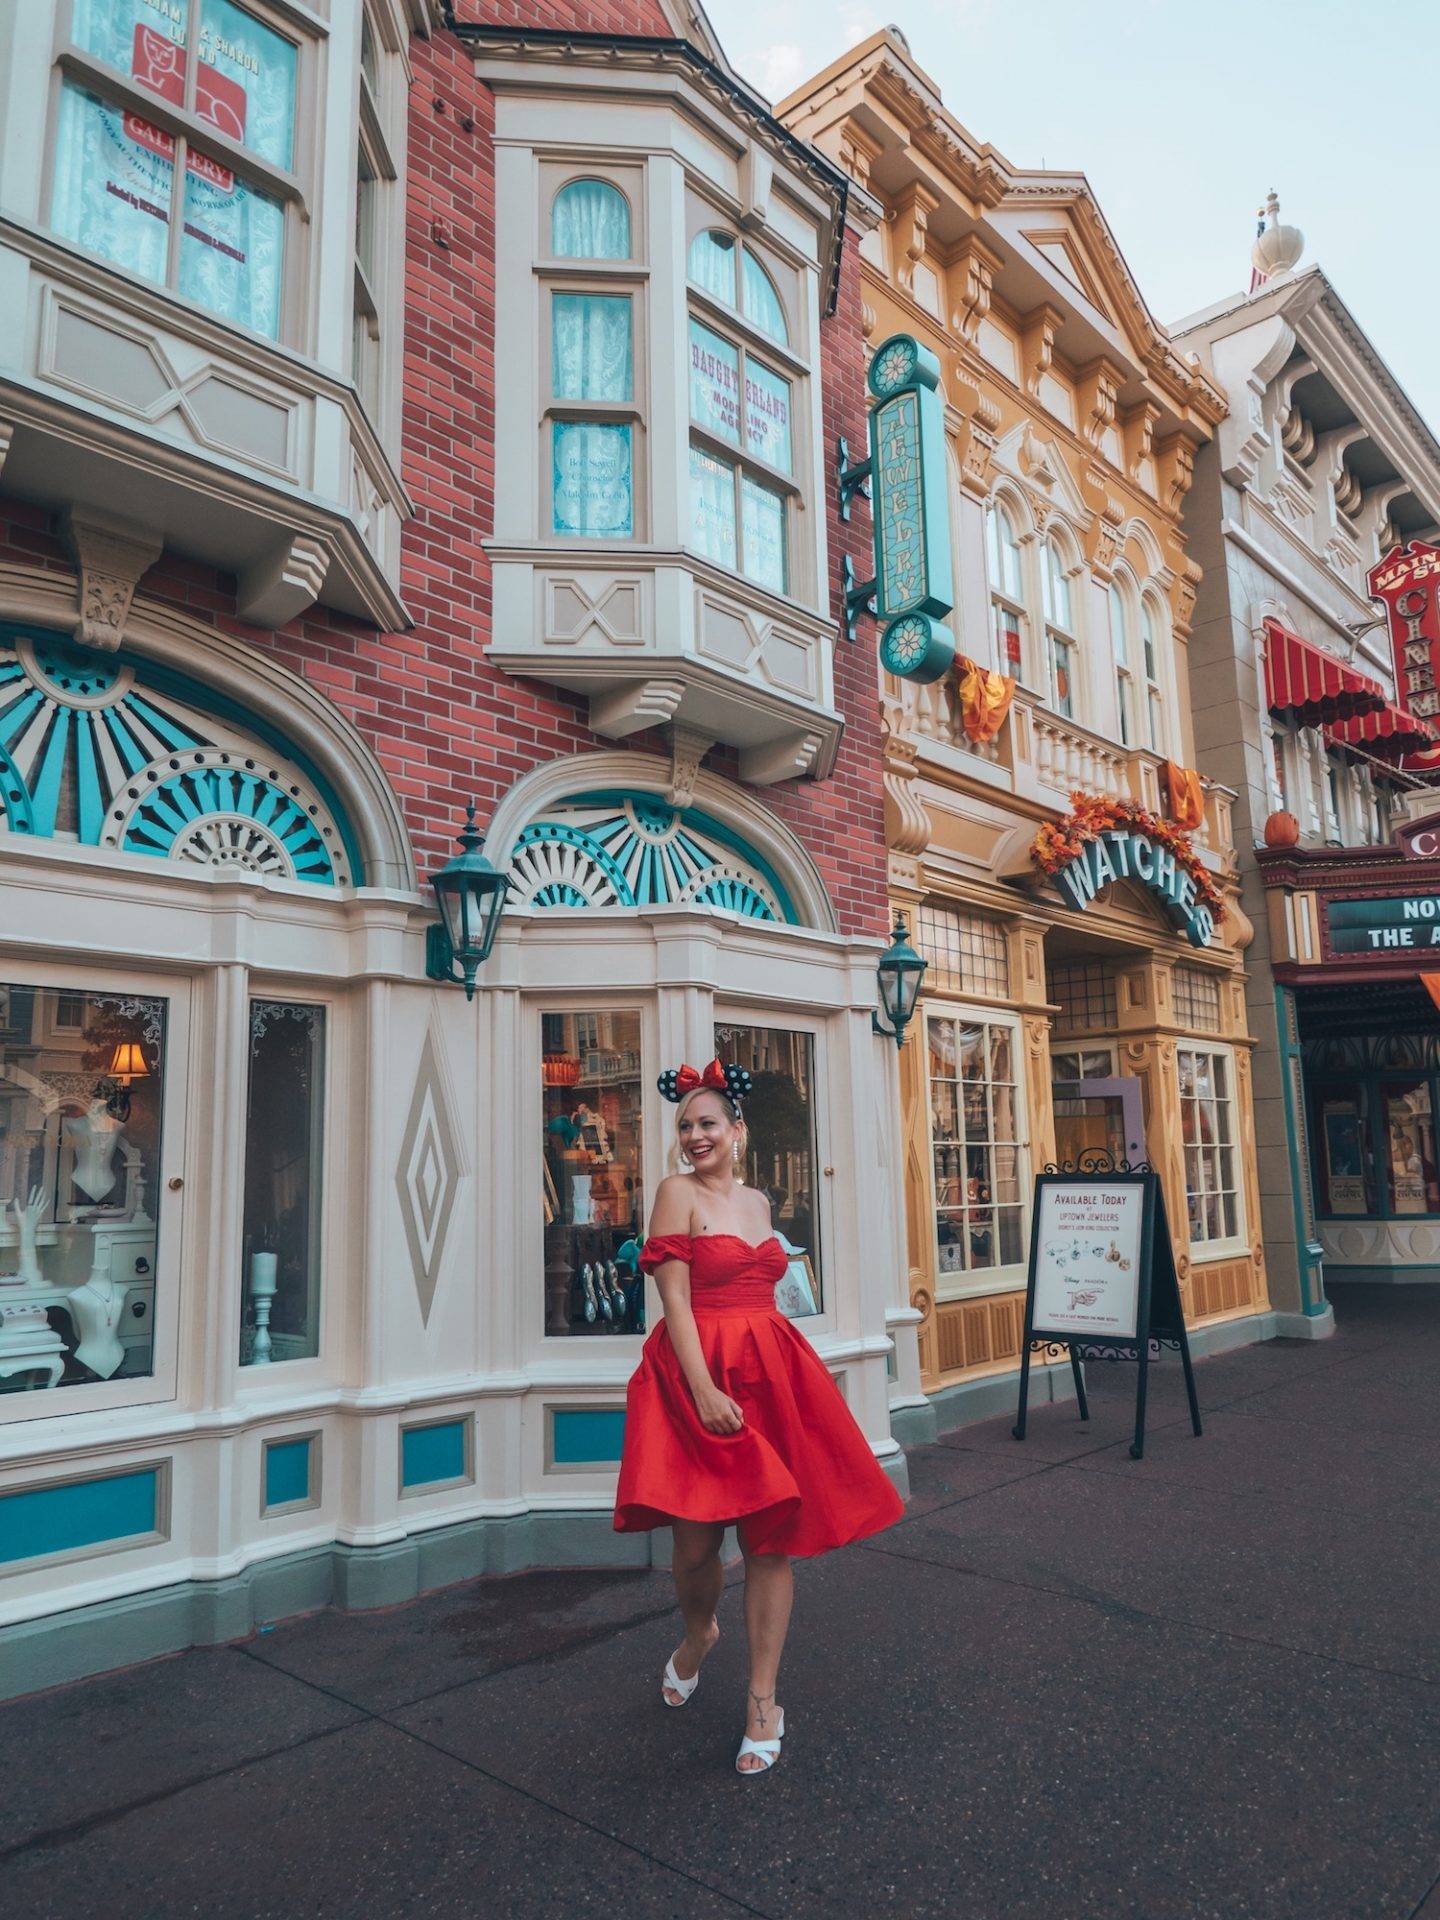 Twirling through Main Street USA in Disney World. Click the photo for a complete guide on how to get the perfect photo at Disney! Includes a list of all the top Disney World photo spots. via www.kirstenwendlandt.com